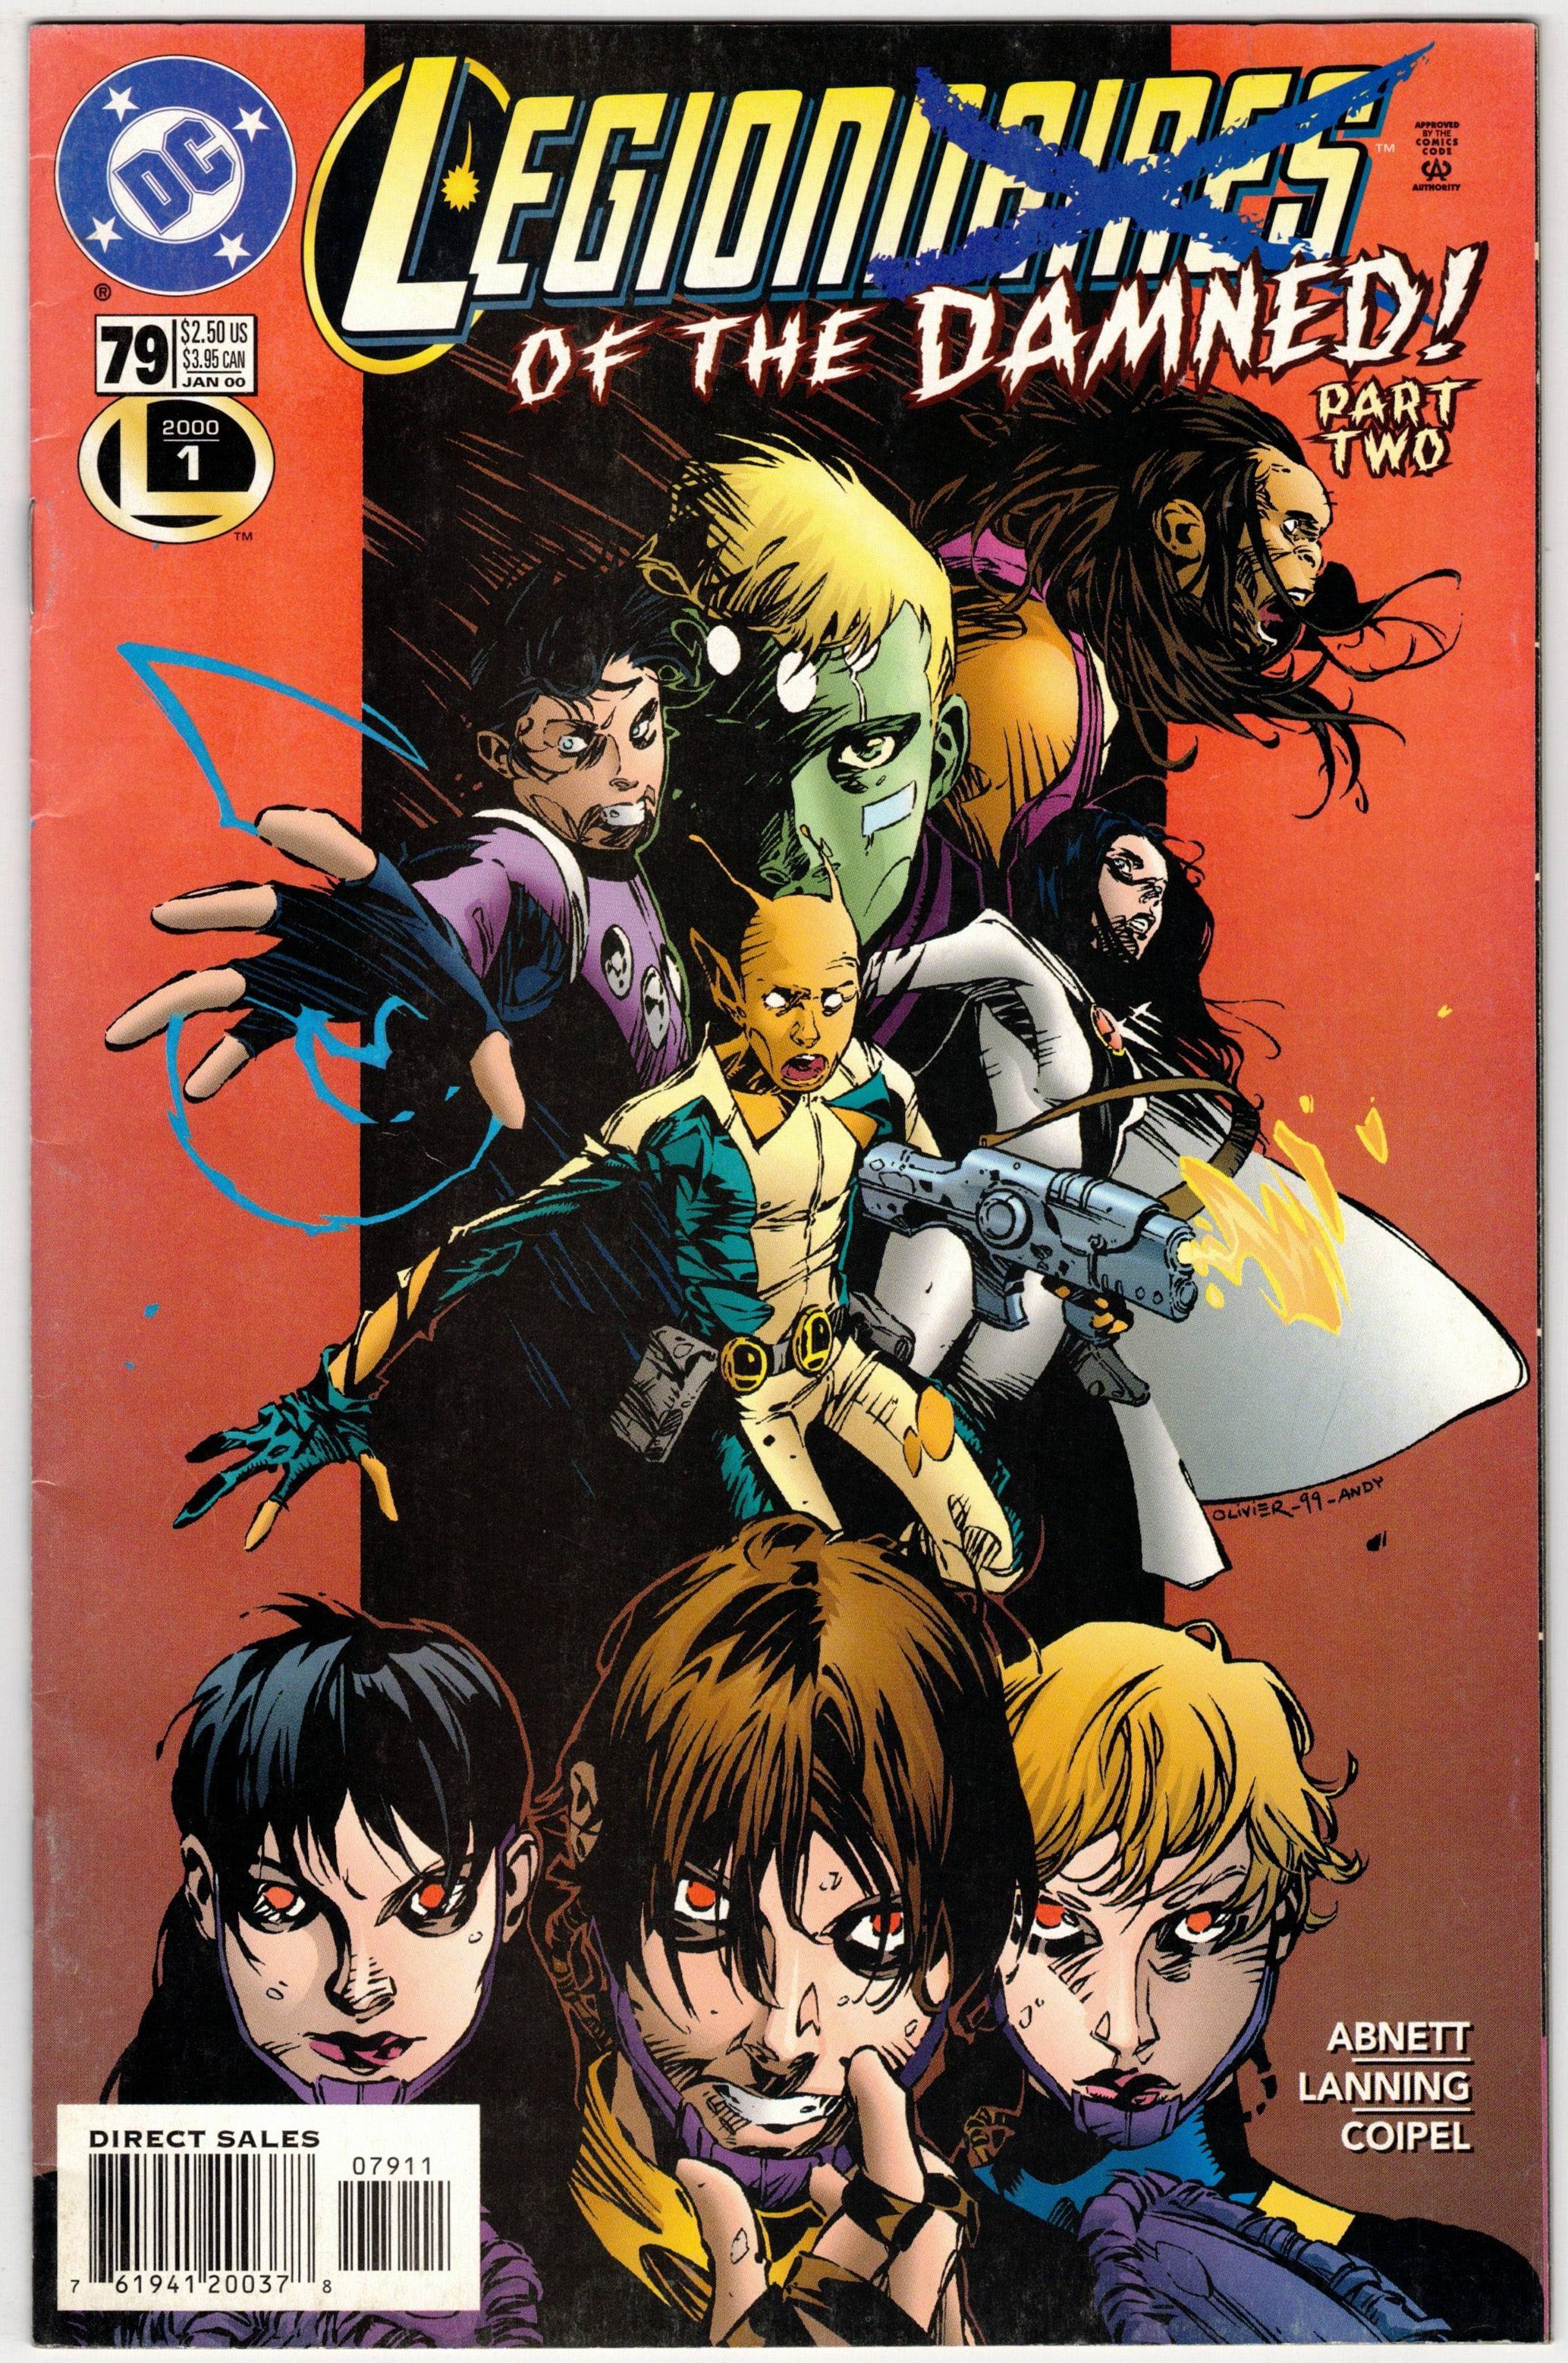 Photo of Legionnaires (2000) Issue 79 - Very Fine Comic sold by Stronghold Collectibles